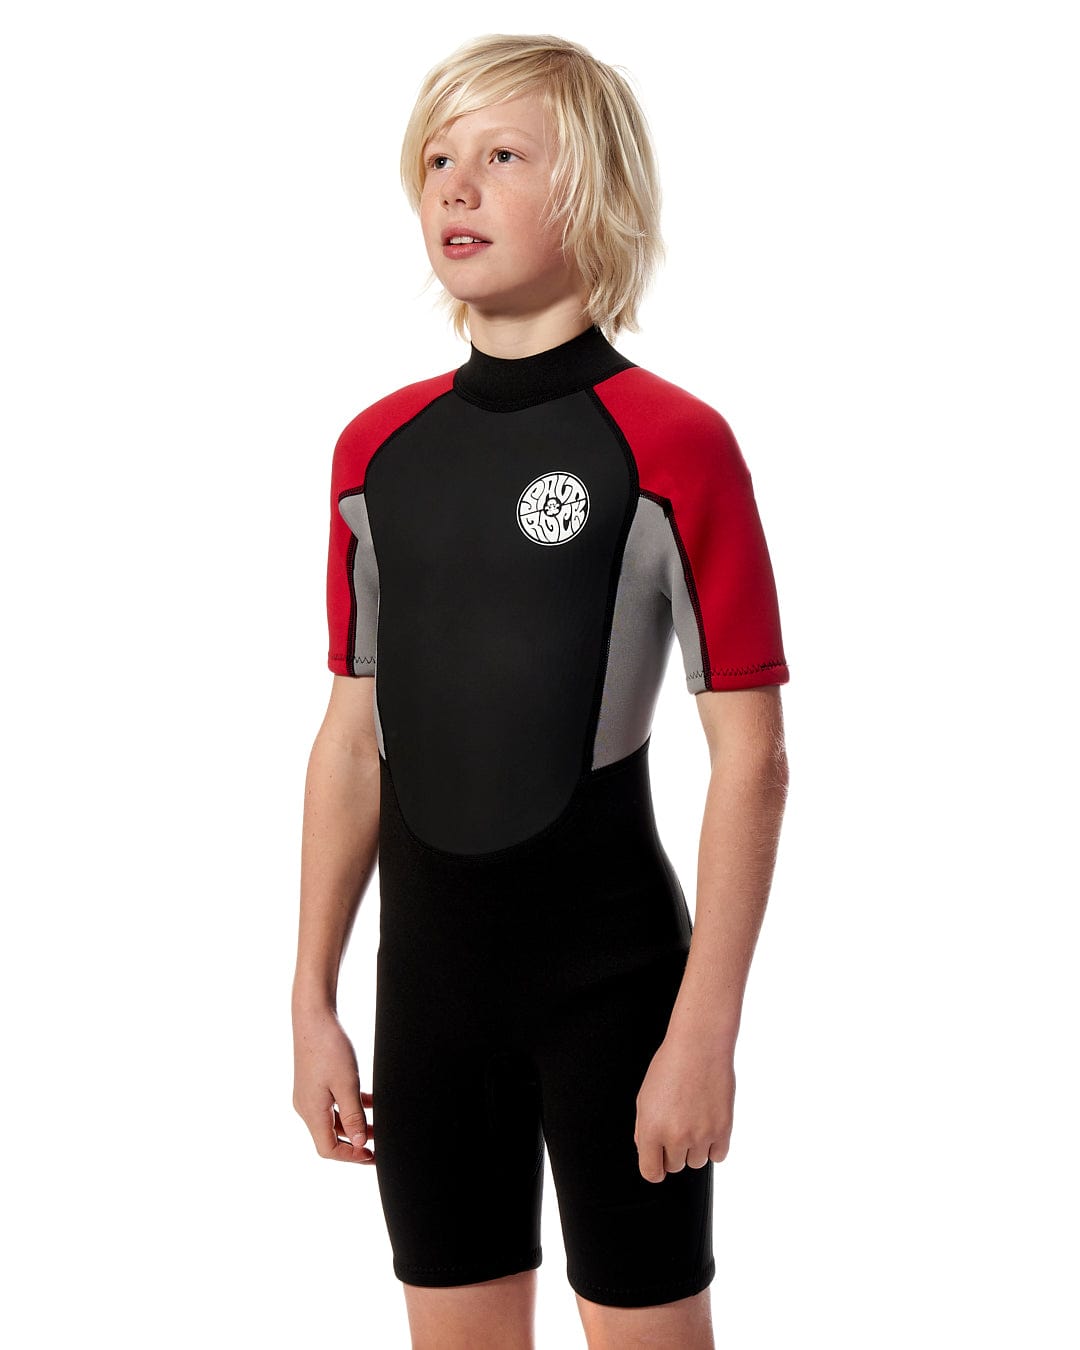 Young boy in a Saltrock Core - Boys 3/2 Shortie Wetsuit - Black/Red standing against a white background. He has tousled blond hair and is looking to the side.